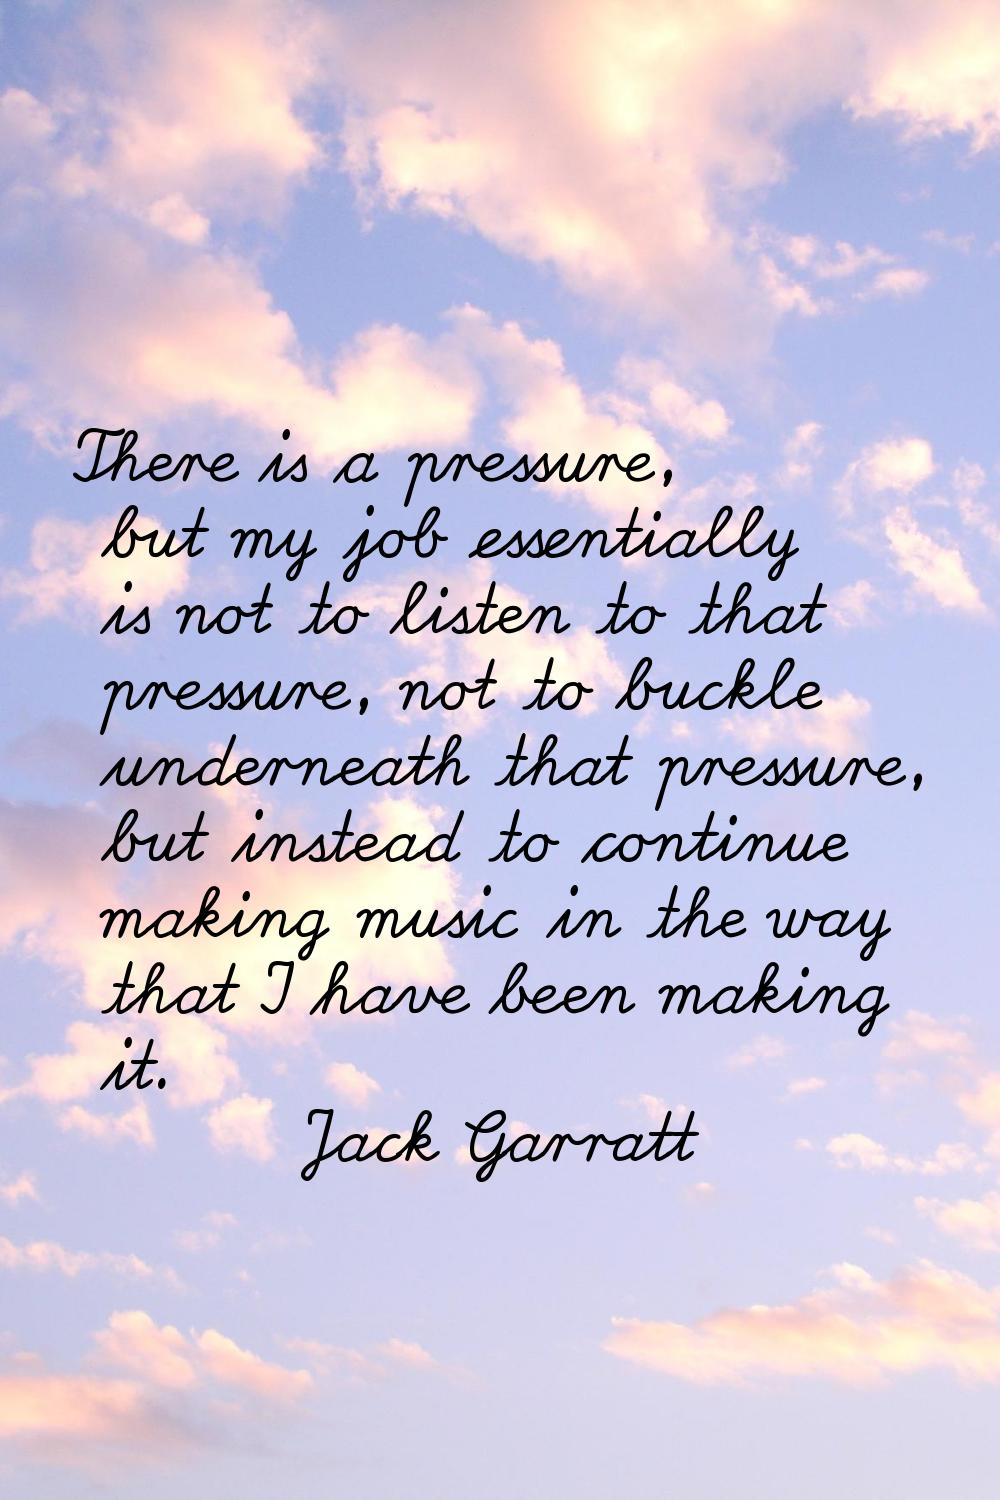 There is a pressure, but my job essentially is not to listen to that pressure, not to buckle undern